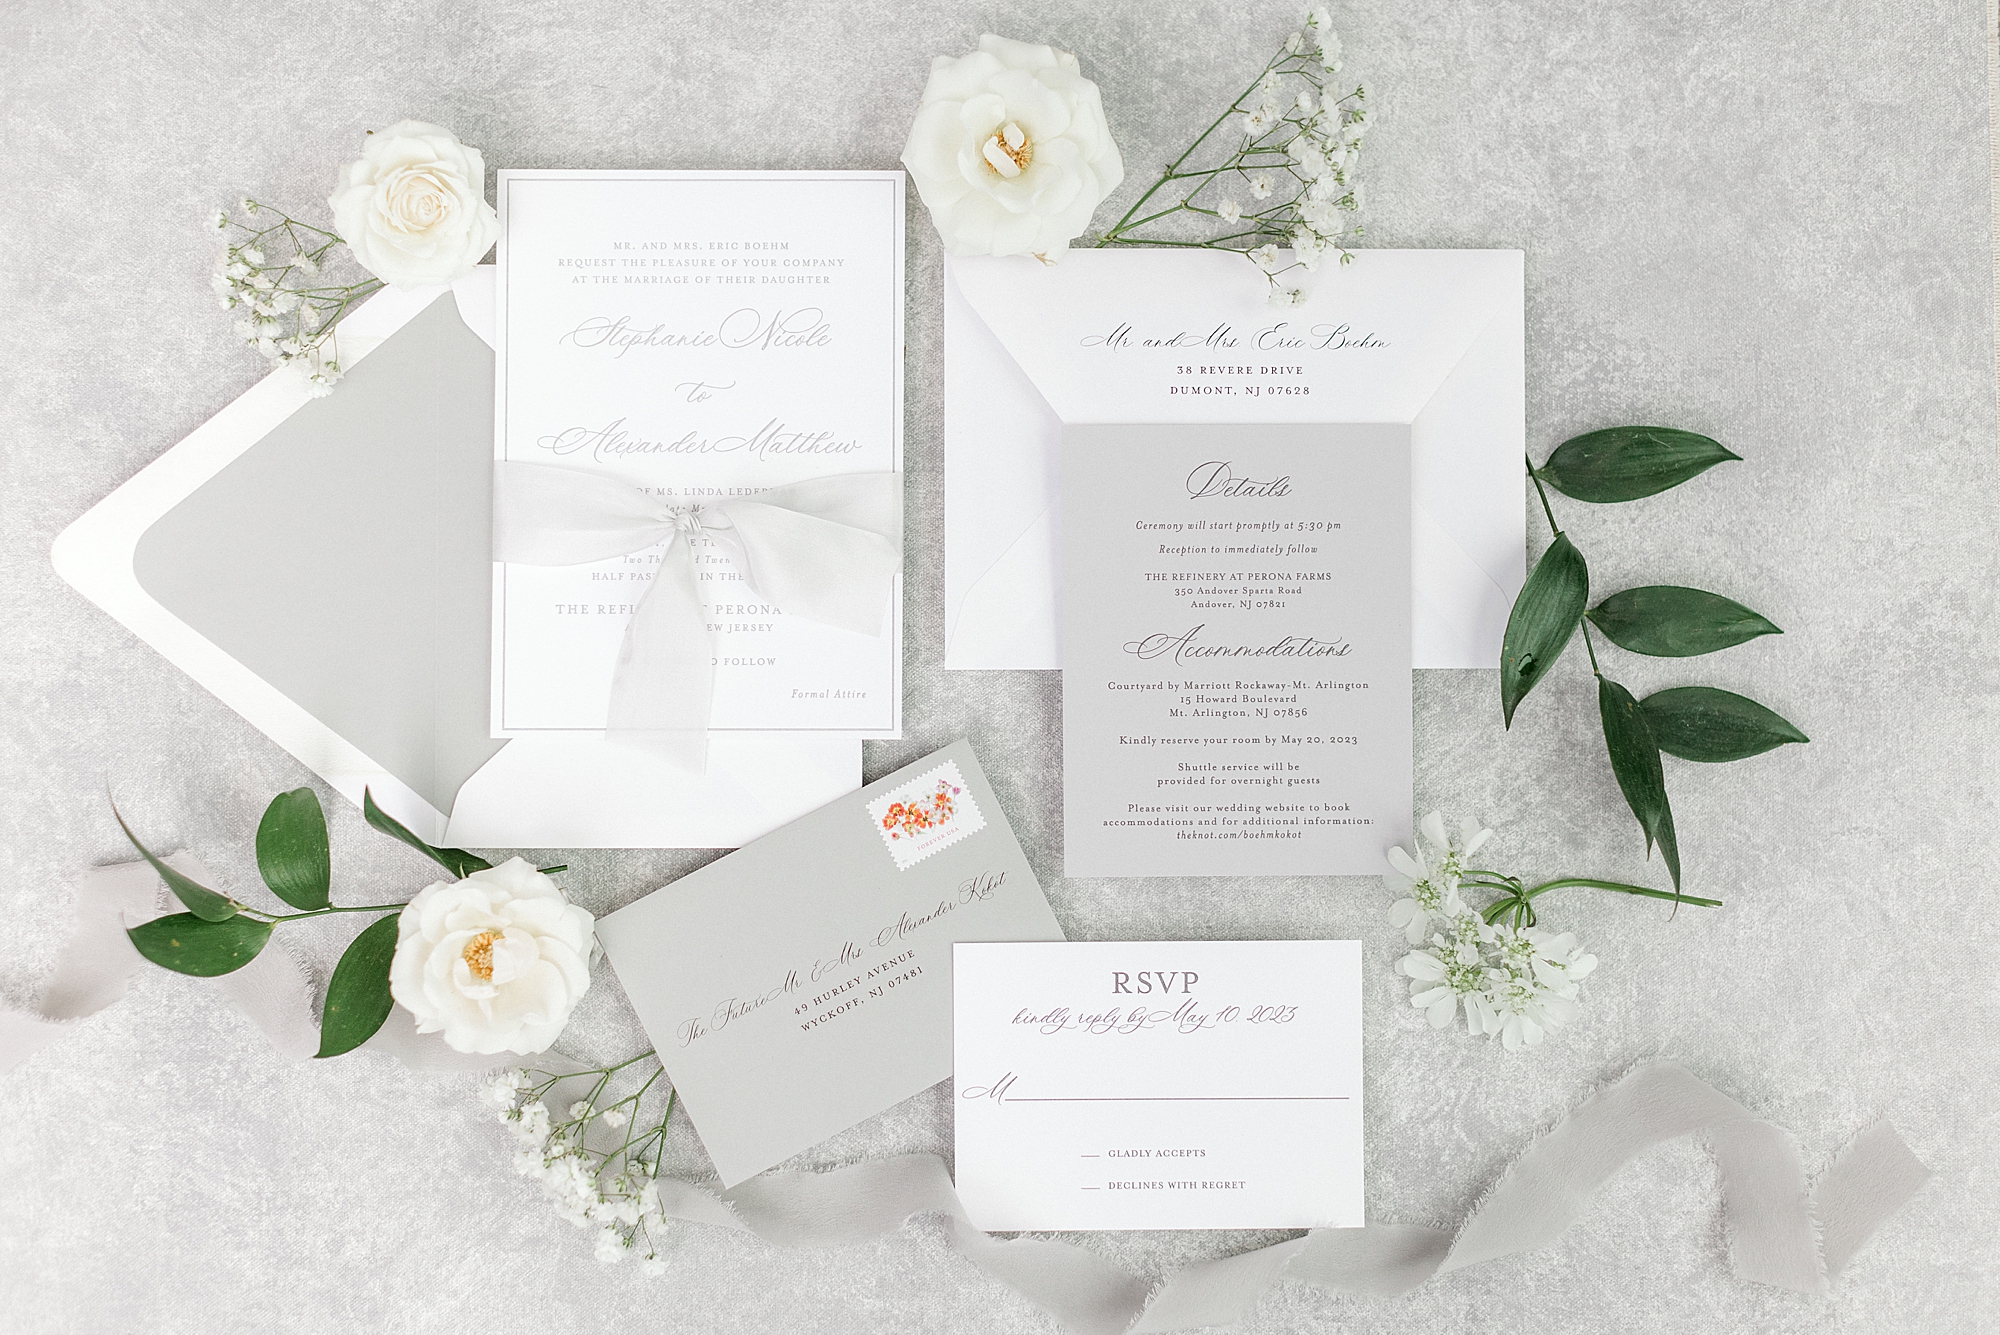 grey and white invitation suite for summer wedding at the Refinery at Perona Farms